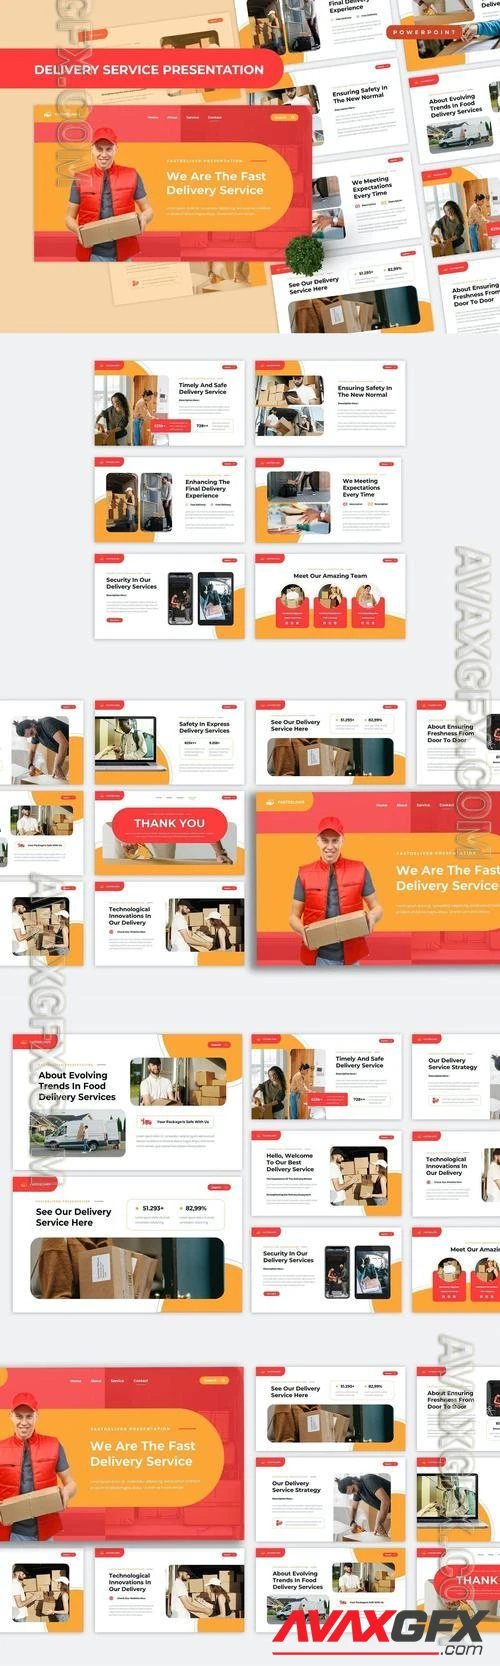 Delivery Service Powerpoint Template